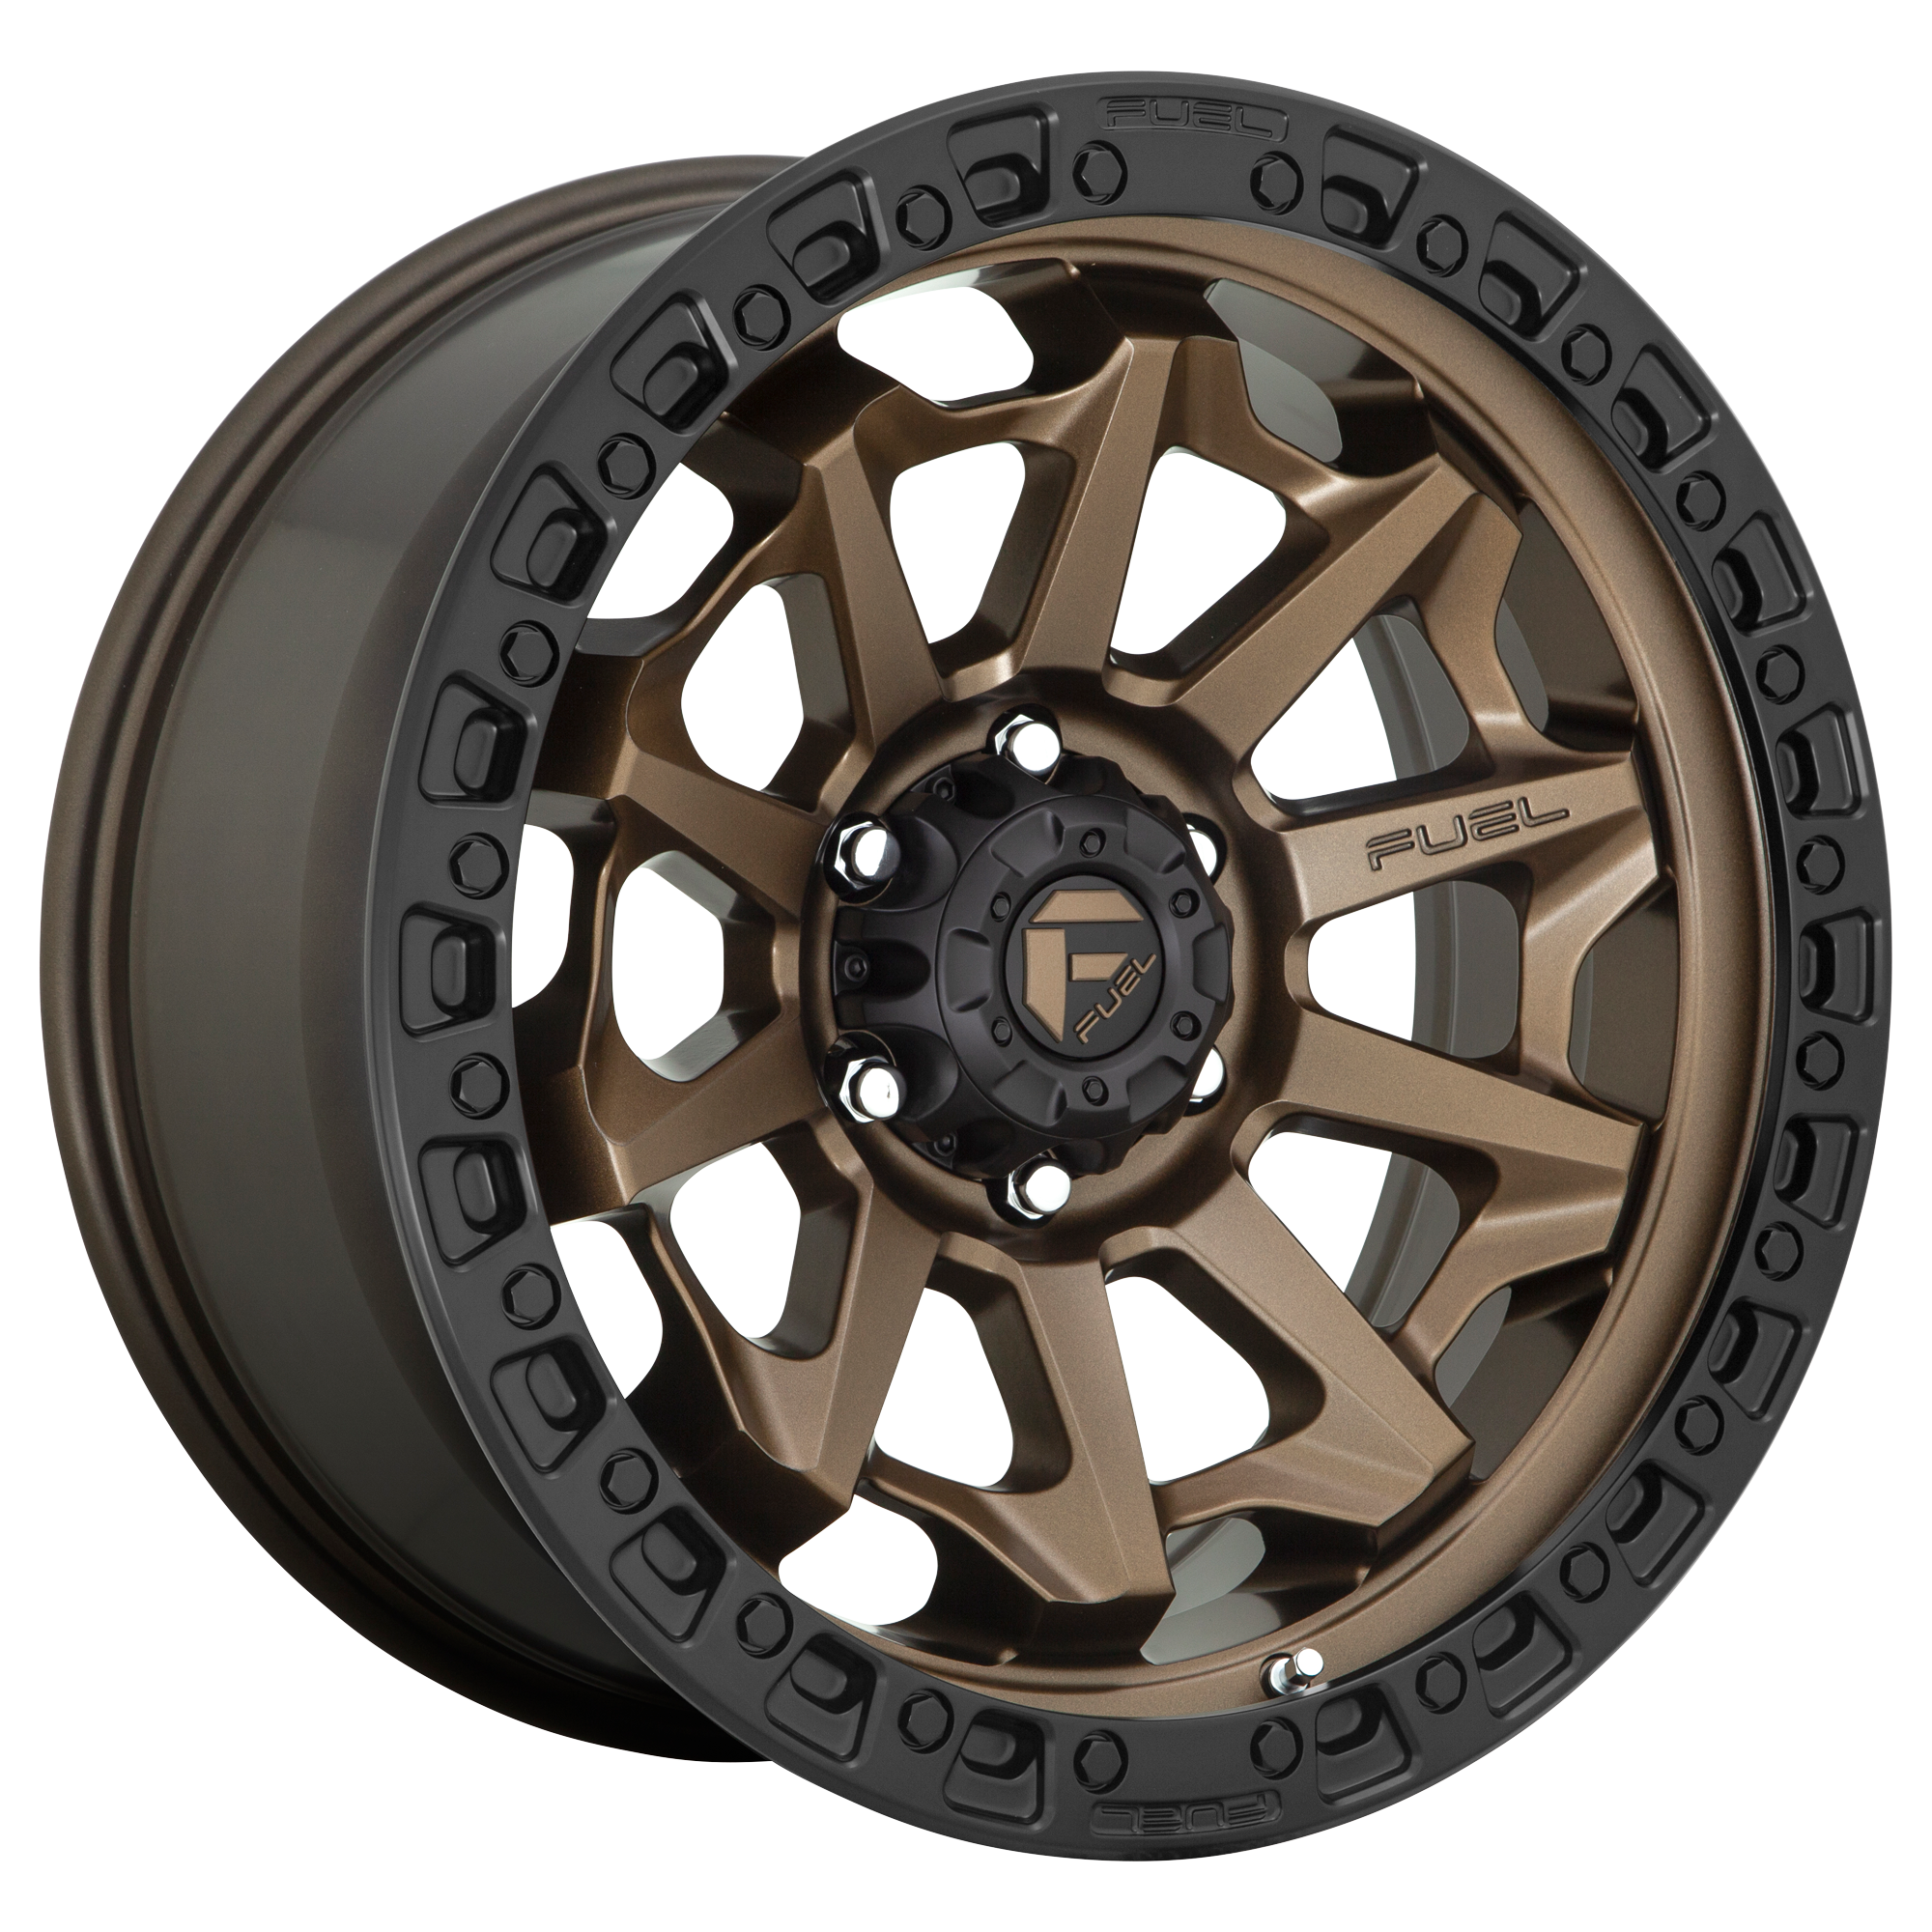 COVERT 18x9 8x170.00 MATTE BRONZE BLACK BEAD RING (20 mm) - Tires and Engine Performance